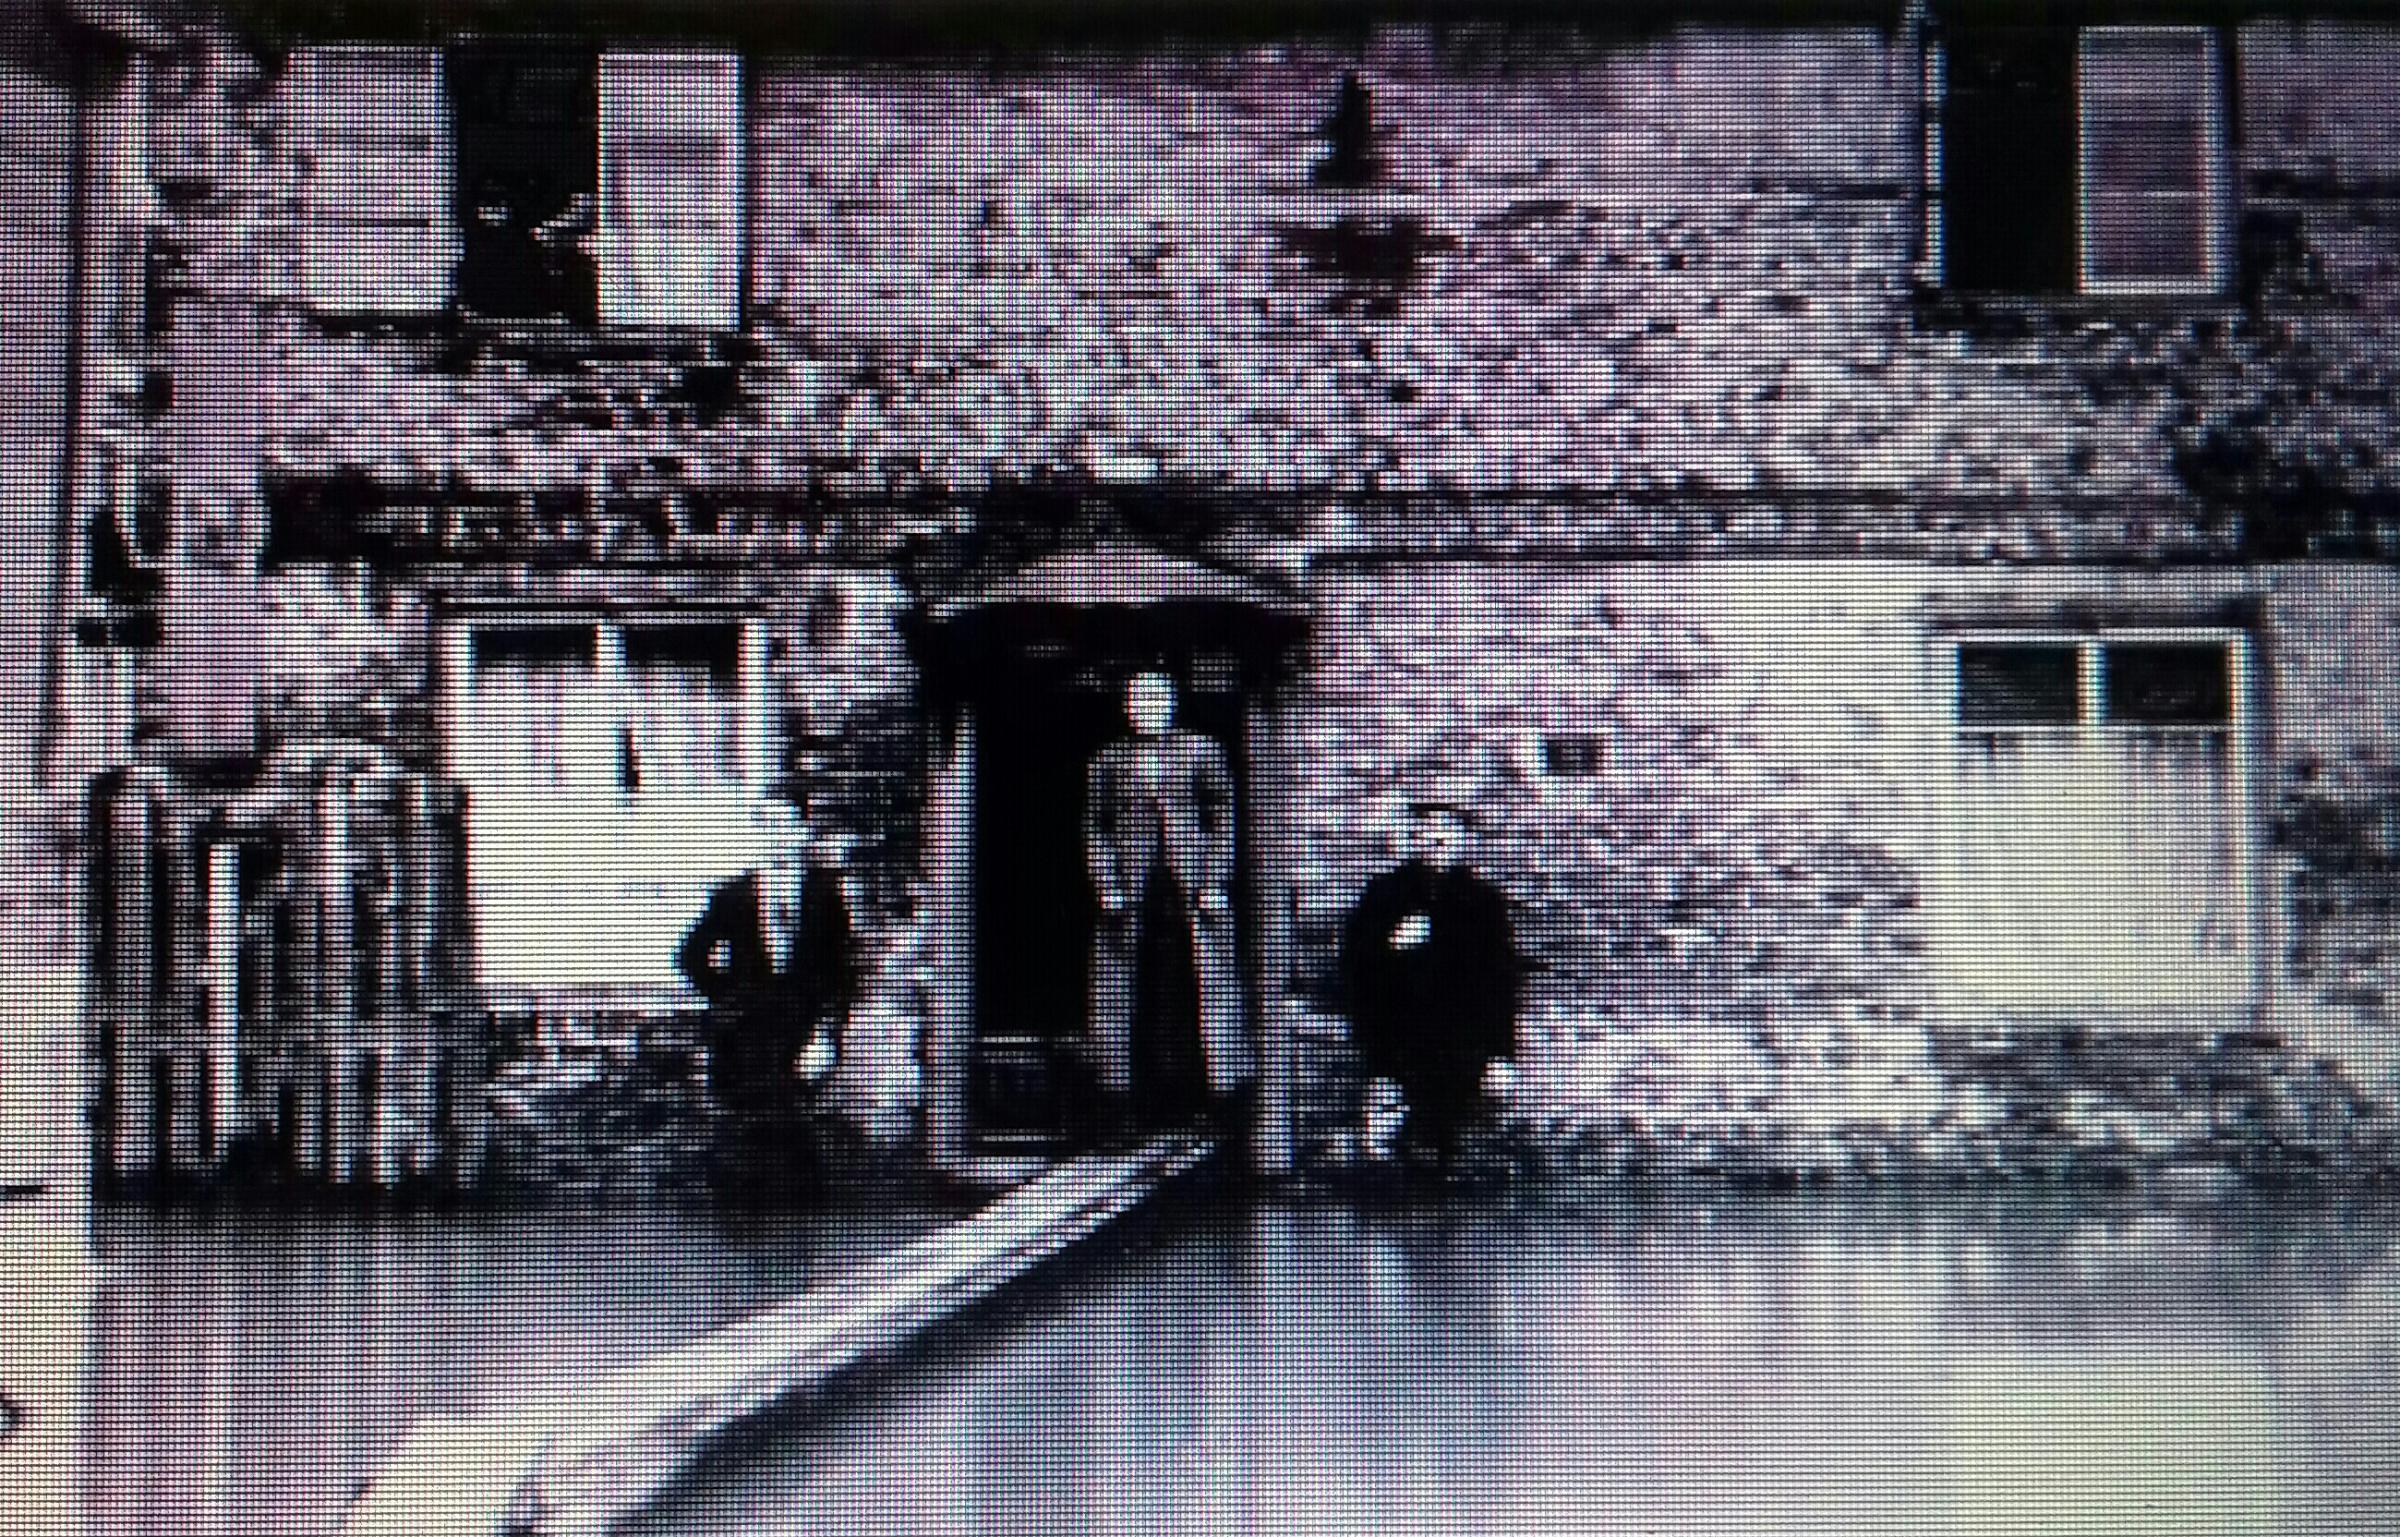 Victorian flooding in Hylton Road shows how easily the water still entered the riverside houses